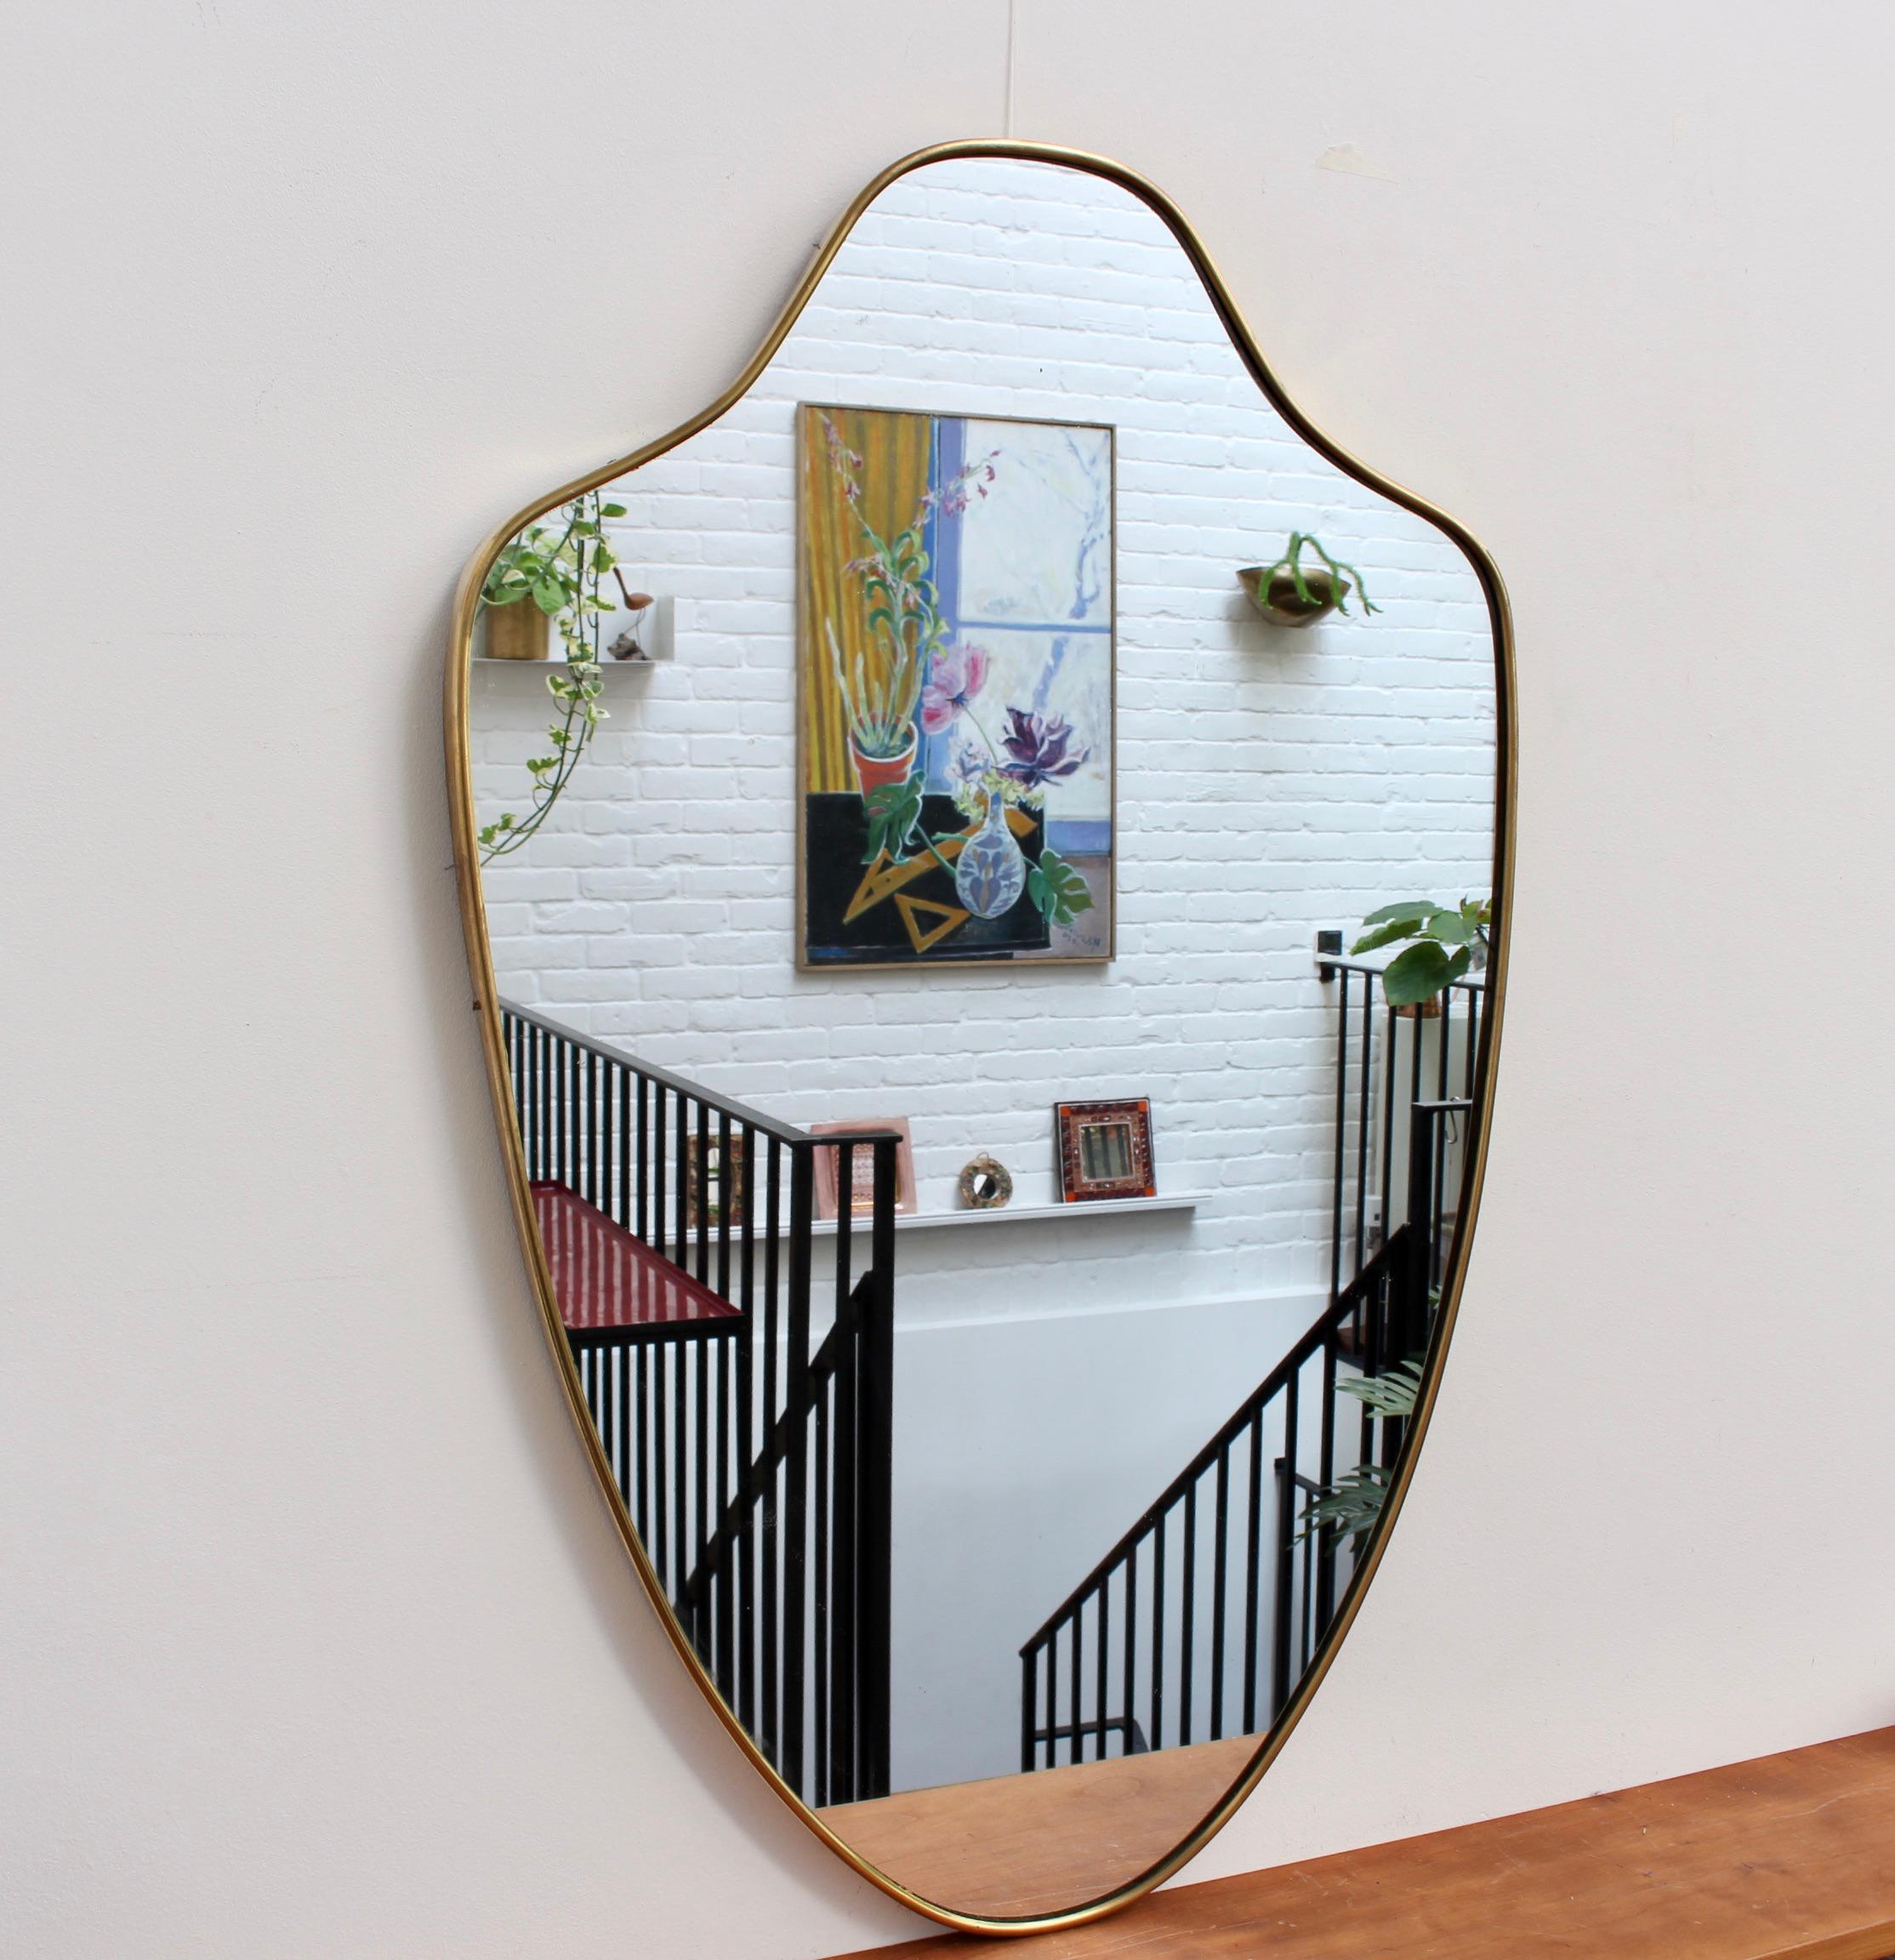 Midcentury Italian wall mirror with brass frame, (1950s). This mirror is simply elegant and characterful in a modern Gio Ponti style. The piece is in overall good condition with a characterful, aged patina on the frame. Please see the many photos